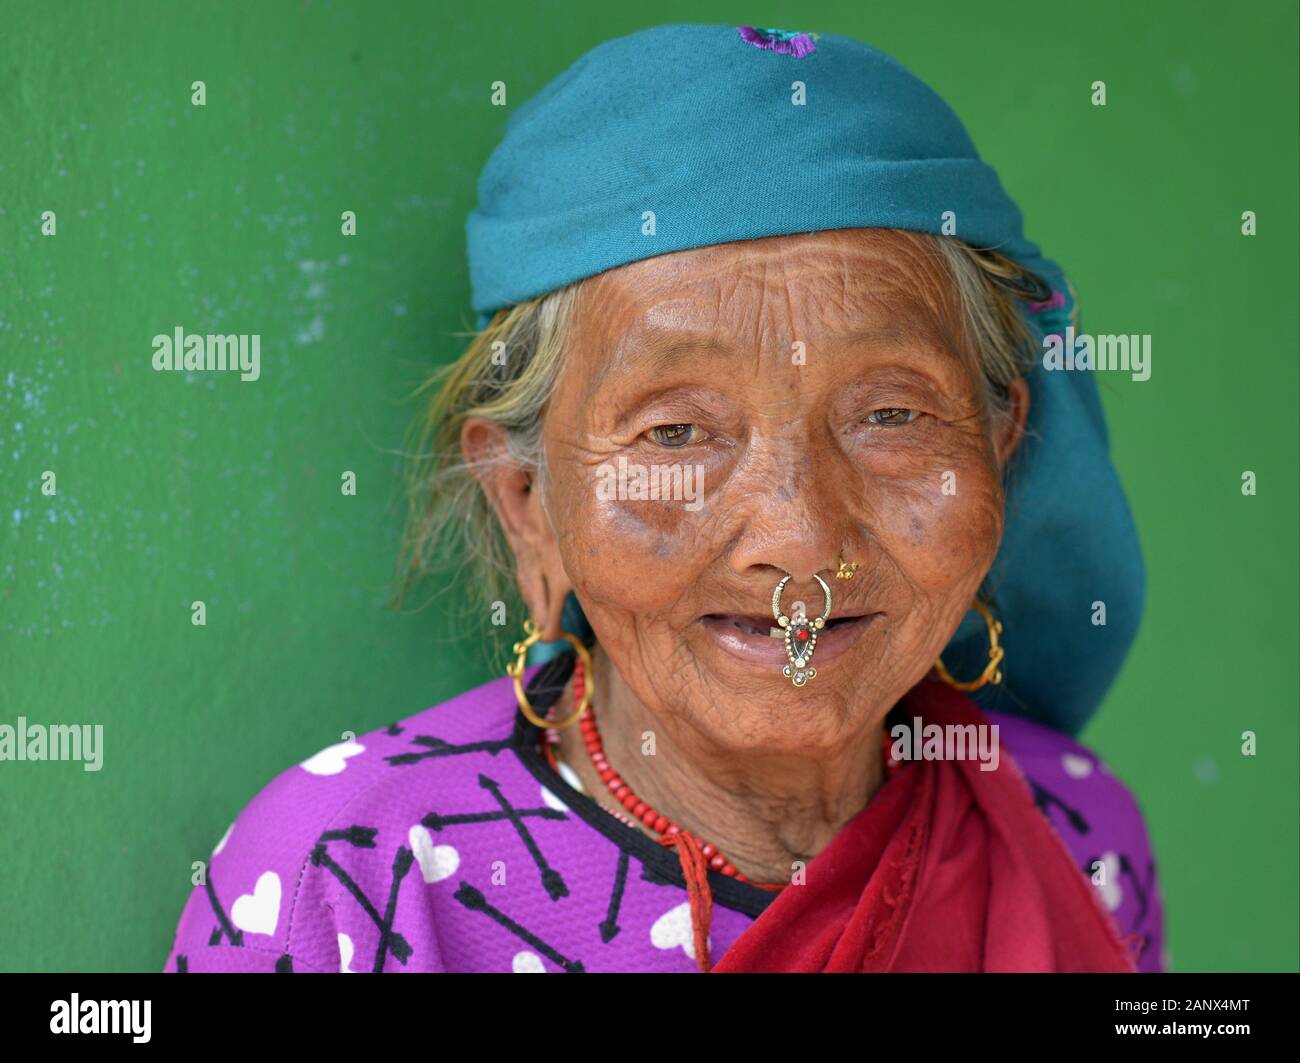 Old Nepali Magar woman with traditional nose jewelry poses for the camera. Stock Photo